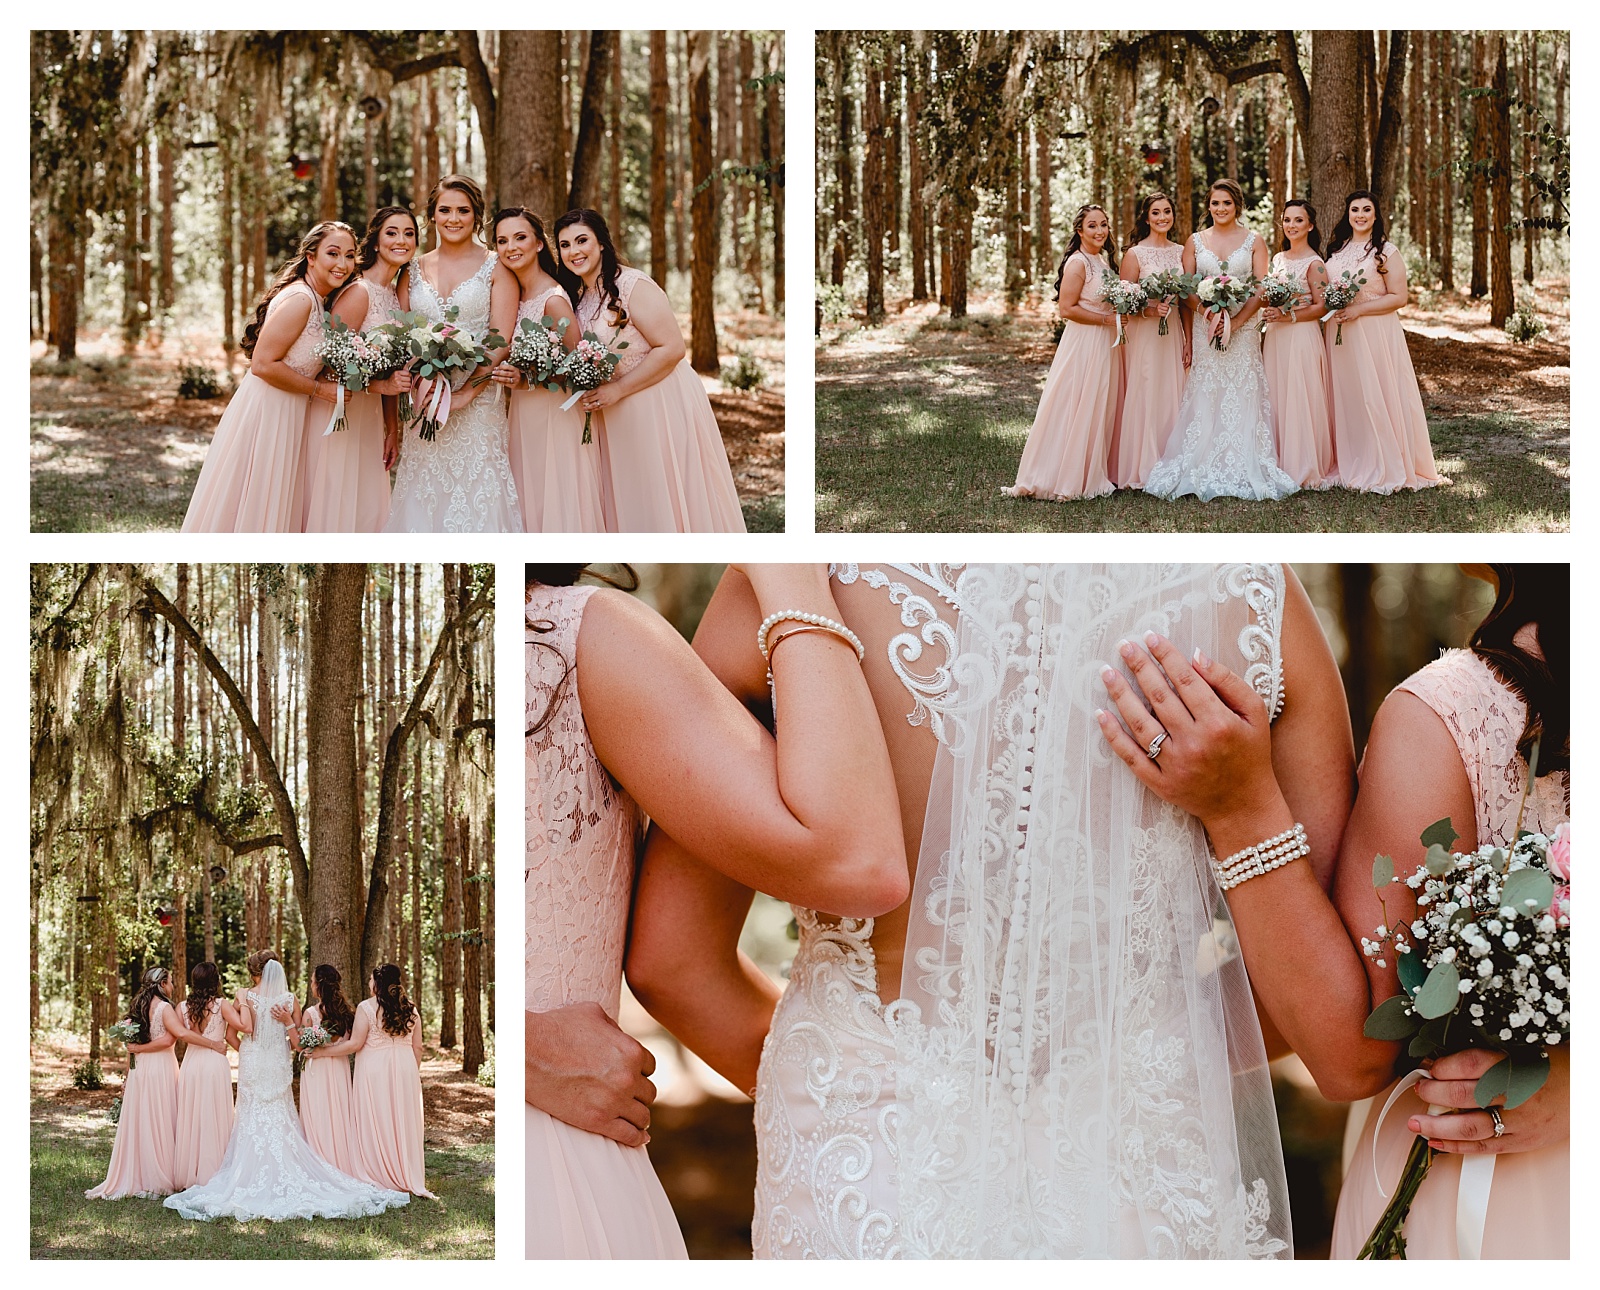 Bride and her bridesmaids taking photos together at Southern Pines, Lake City, FL. Shelly Williams Photography